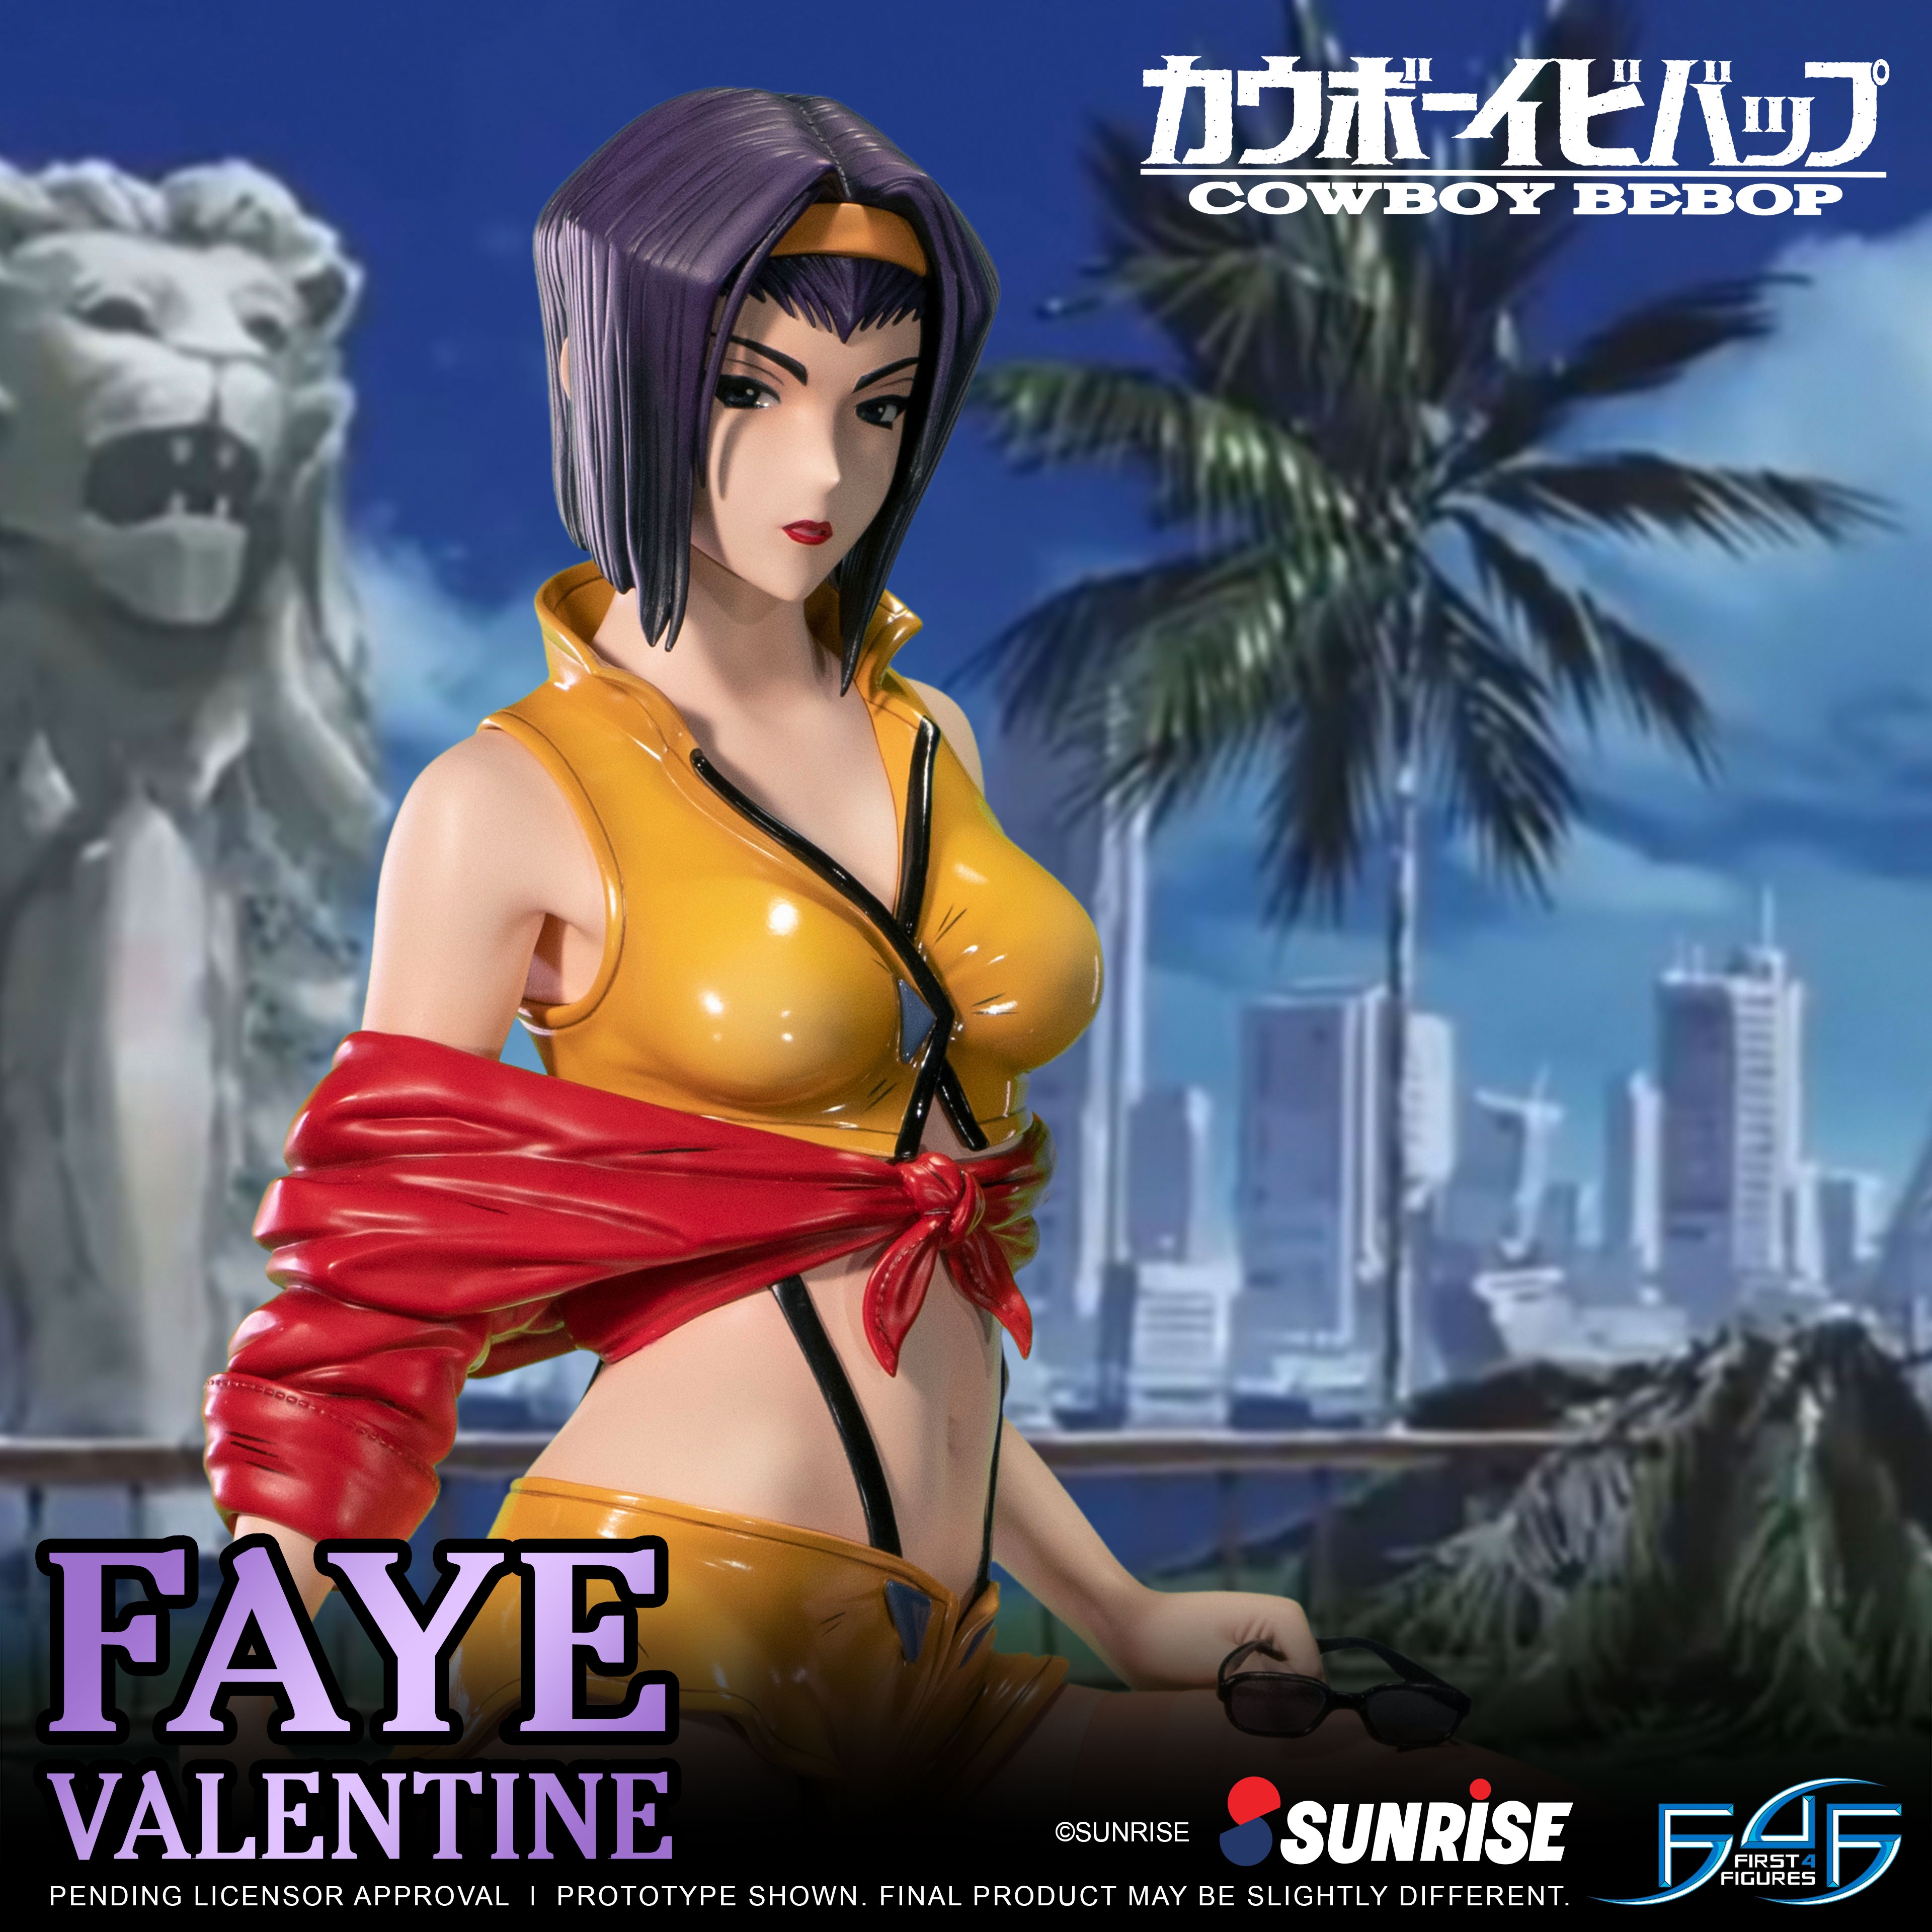 A First Look at First 4 Figures' Cowboy Bebop – Faye Valentine Statue